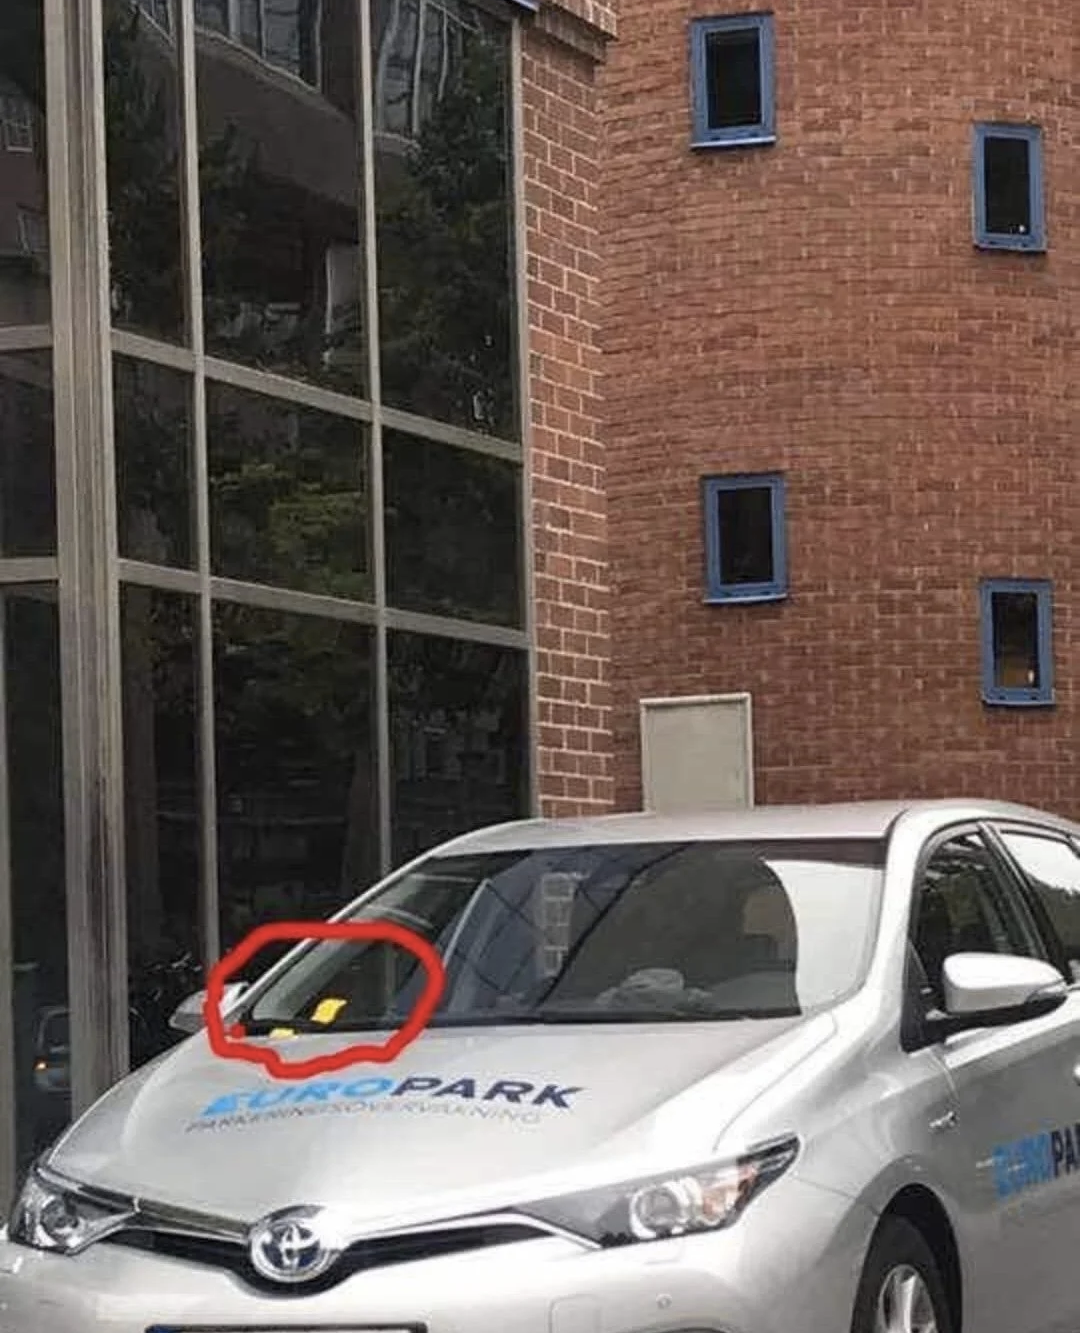 While giving me a ticket, Europark received a ticket from QPark because of parking violation